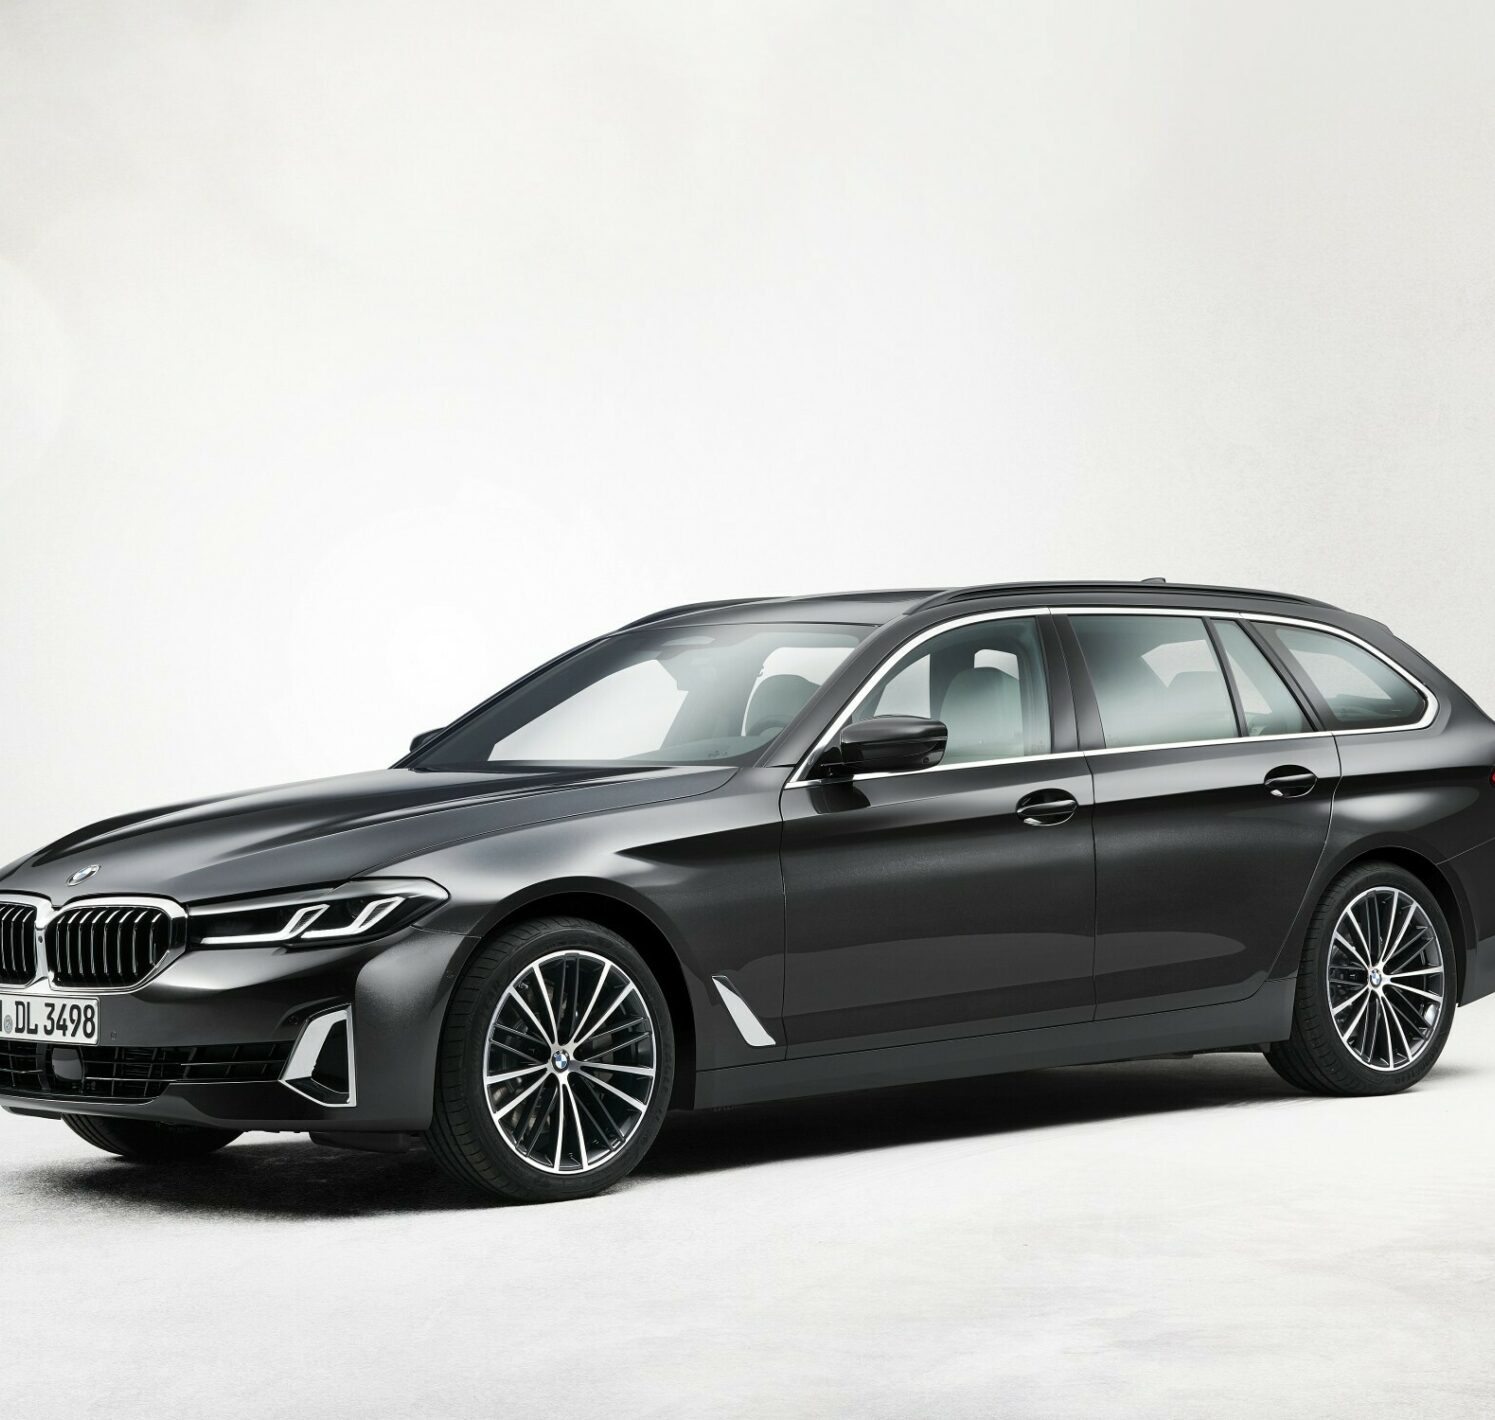 https://autofilter.sk/assets/images/rad-5-touring/gallery/P90389097_lowRes_the-new-bmw-530i-tou.jpg - obrazok